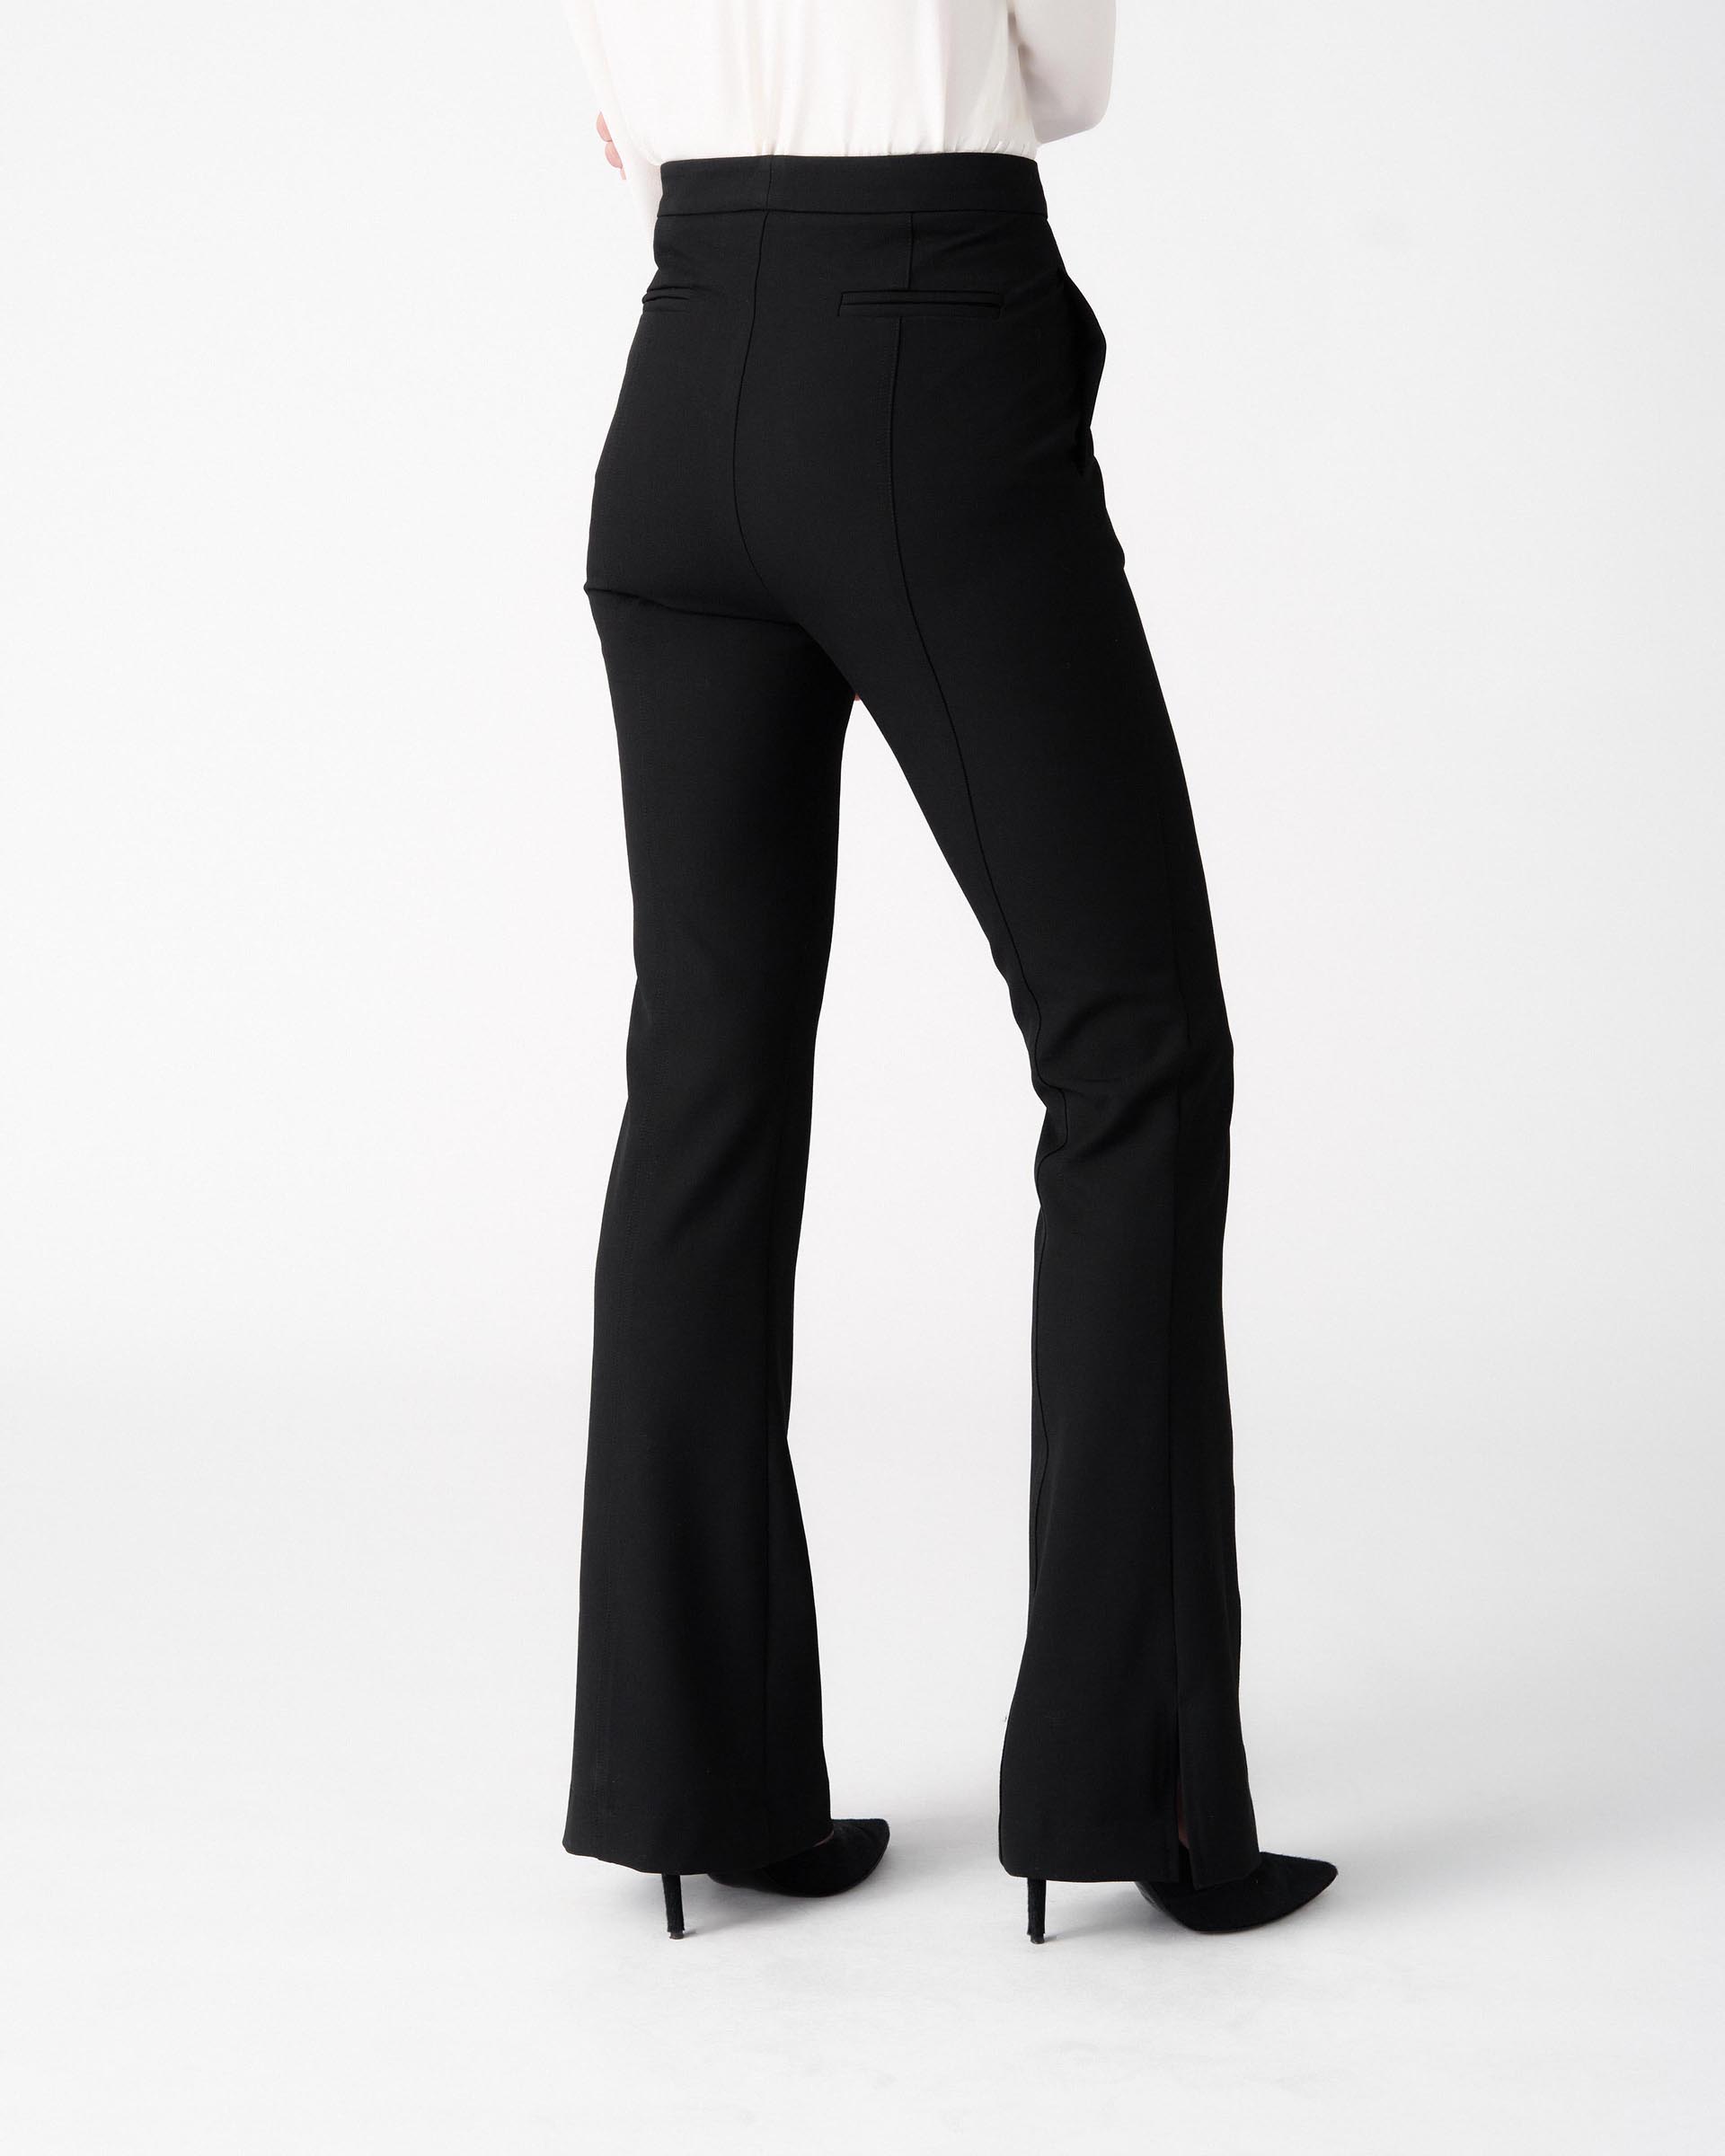 The Market Store | Pants With Slit On The Bottom